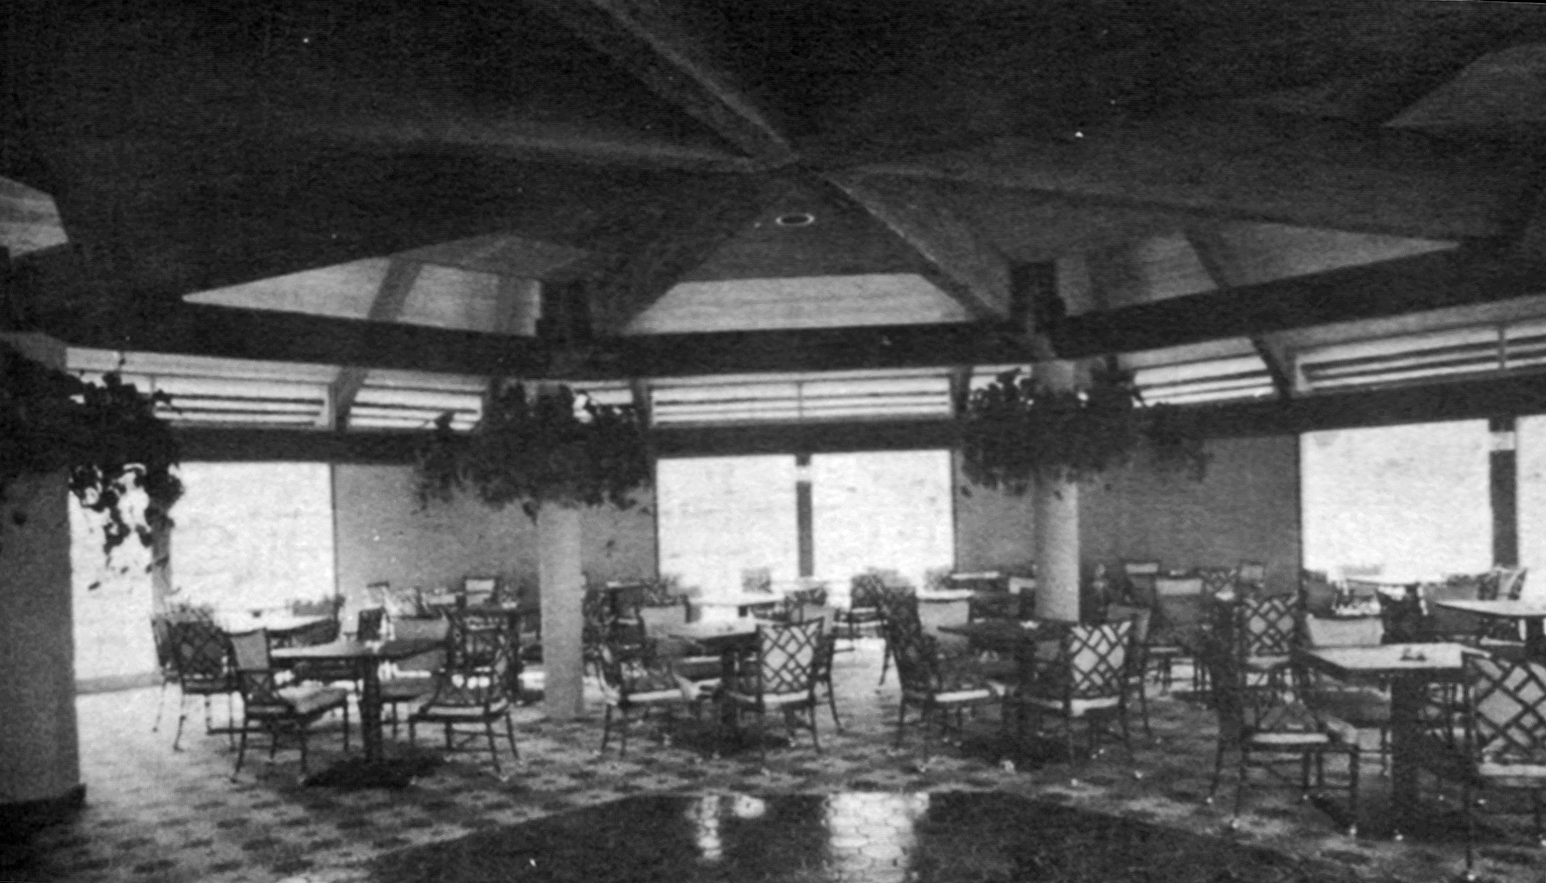 Photo showing the inside of the original Beach Club in AIP